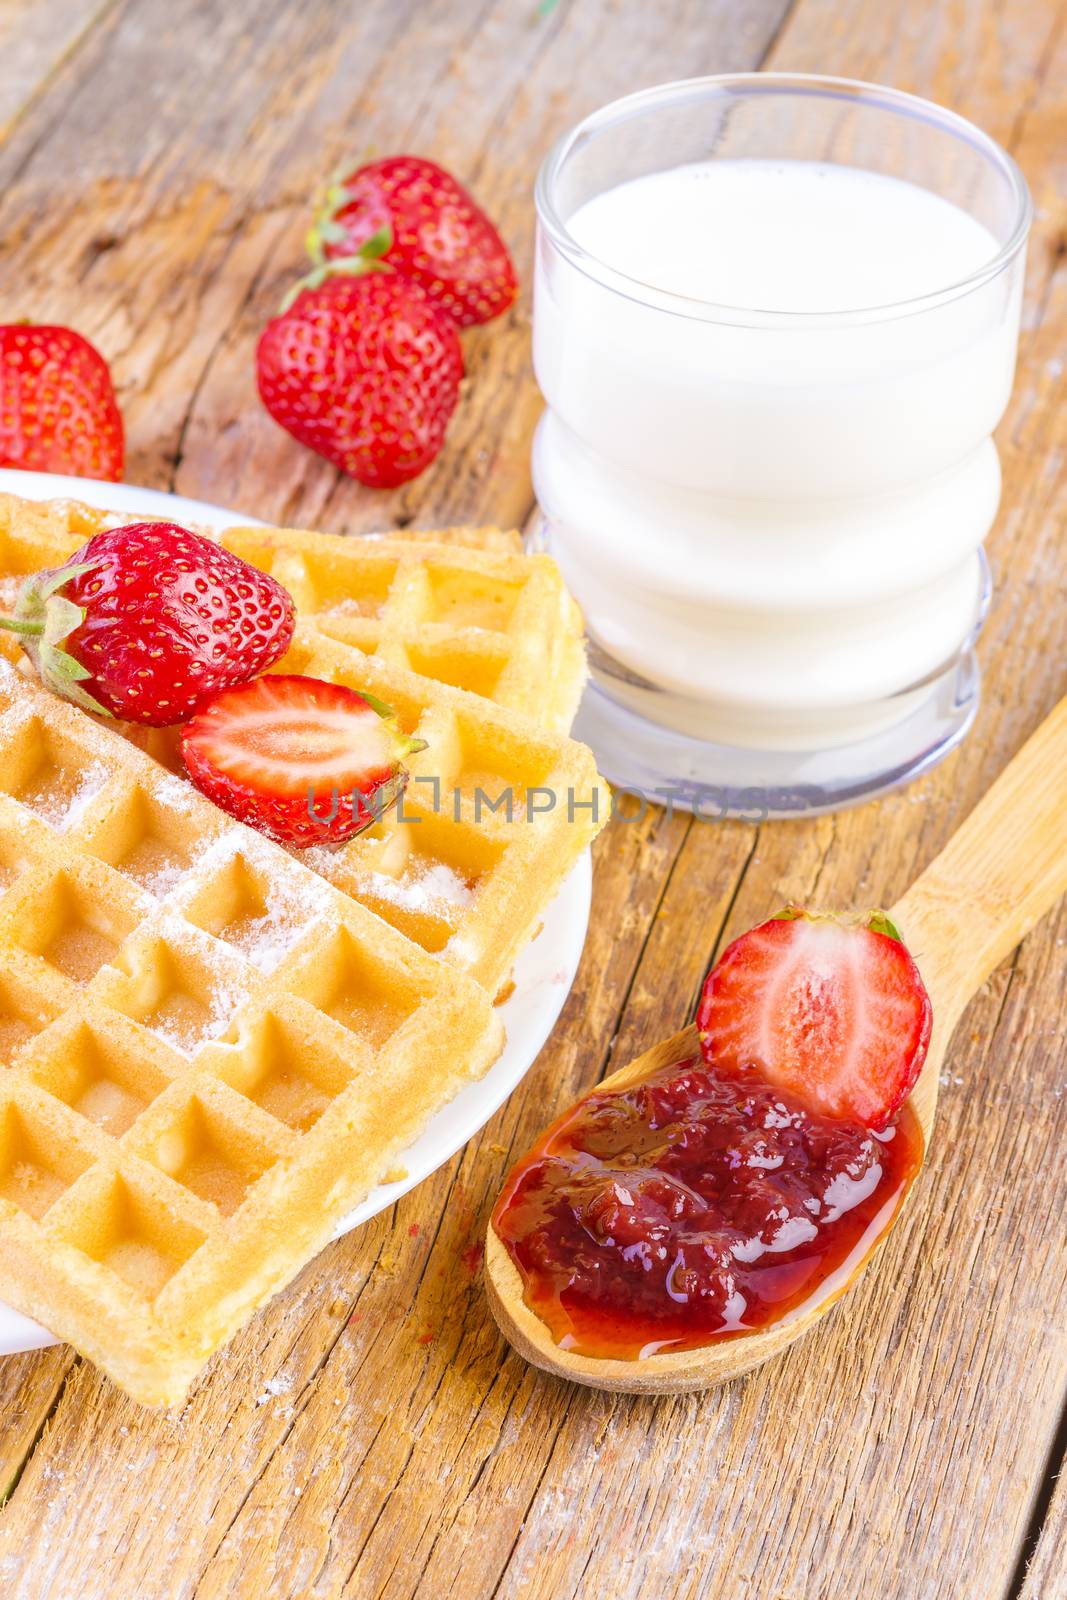 homemade waffles with strawberries maple syrup and glass with milk on wooden background